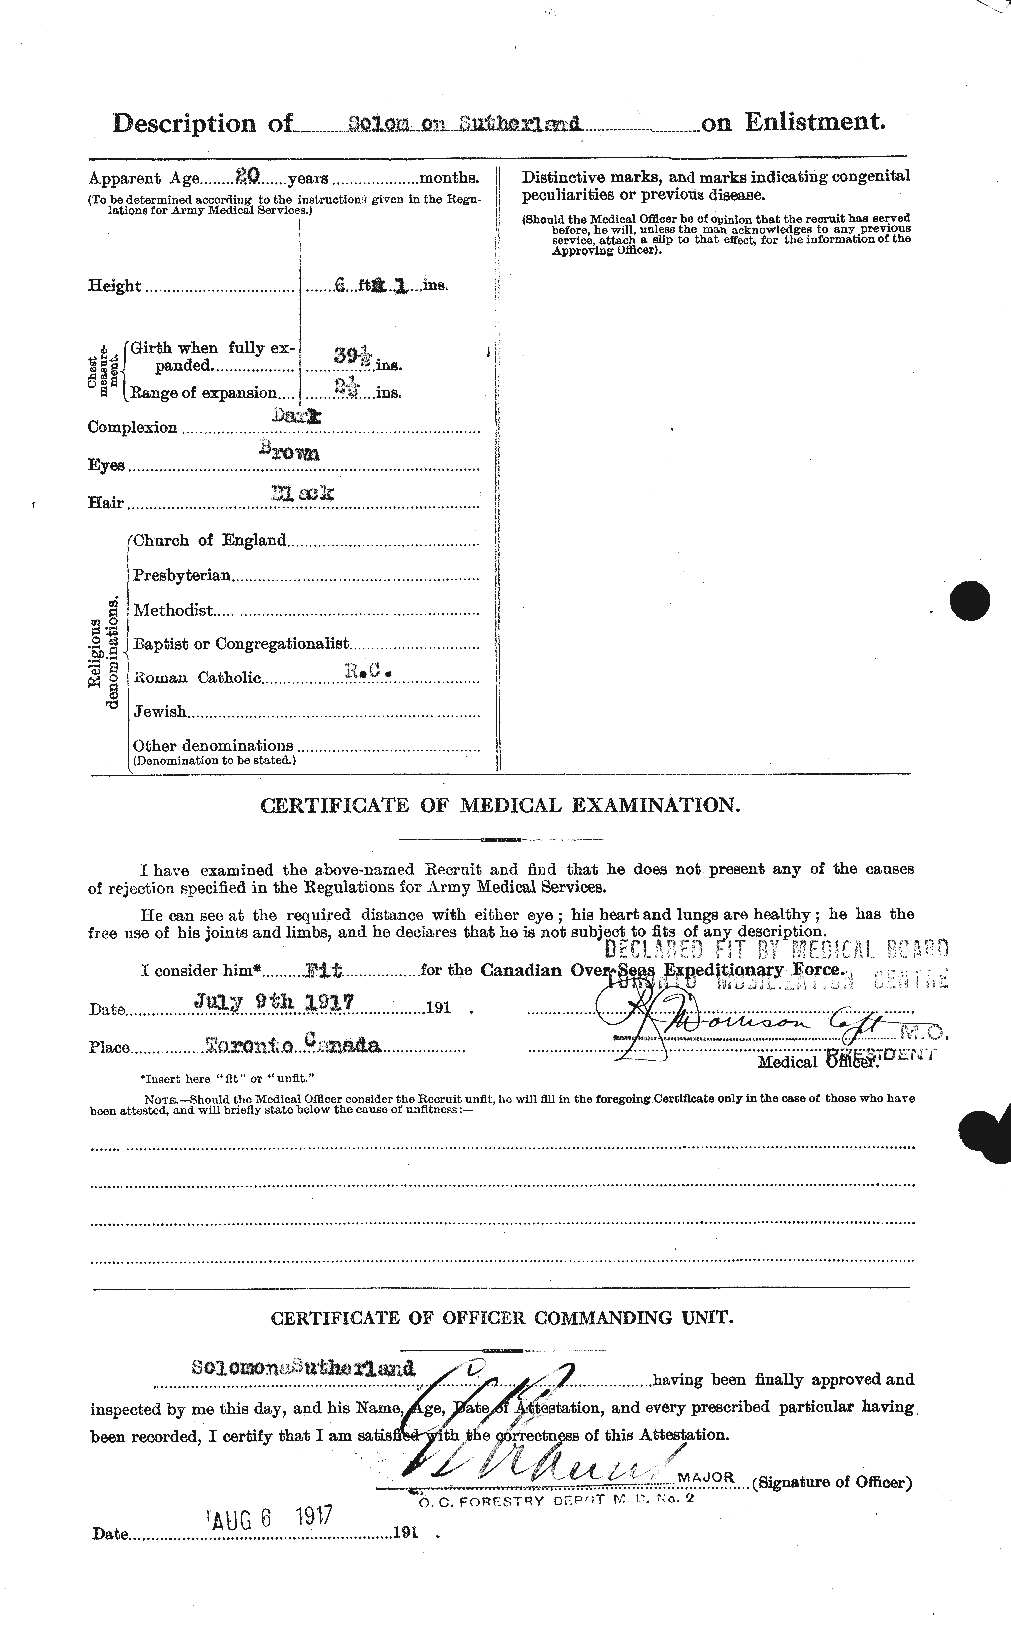 Personnel Records of the First World War - CEF 126557b